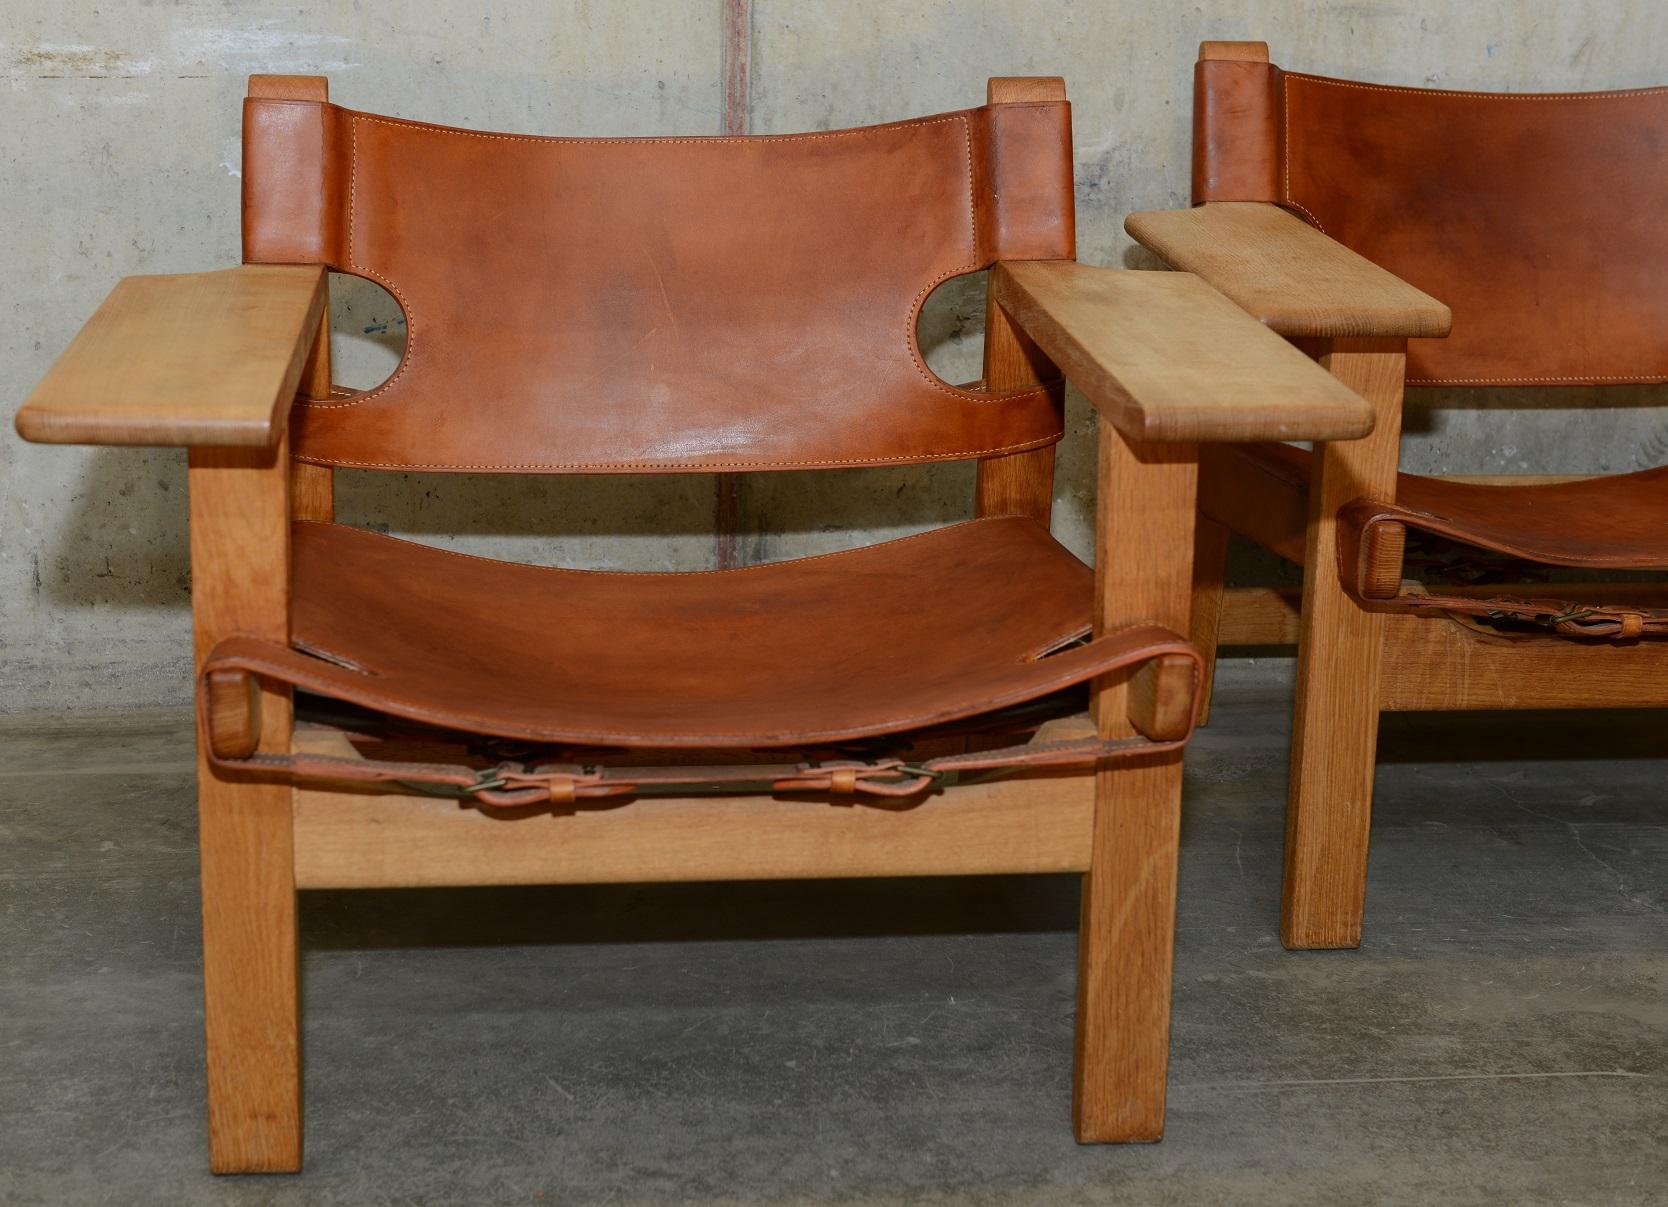 2 oak and cognac leather Spanish chairs designed by Danish Børge Mogensen. The chairs feature wide armrests and leather details. Robust but still elegant design. A true Scandinavian Modern / midcentury Classic. These 2 specific chairs were produced